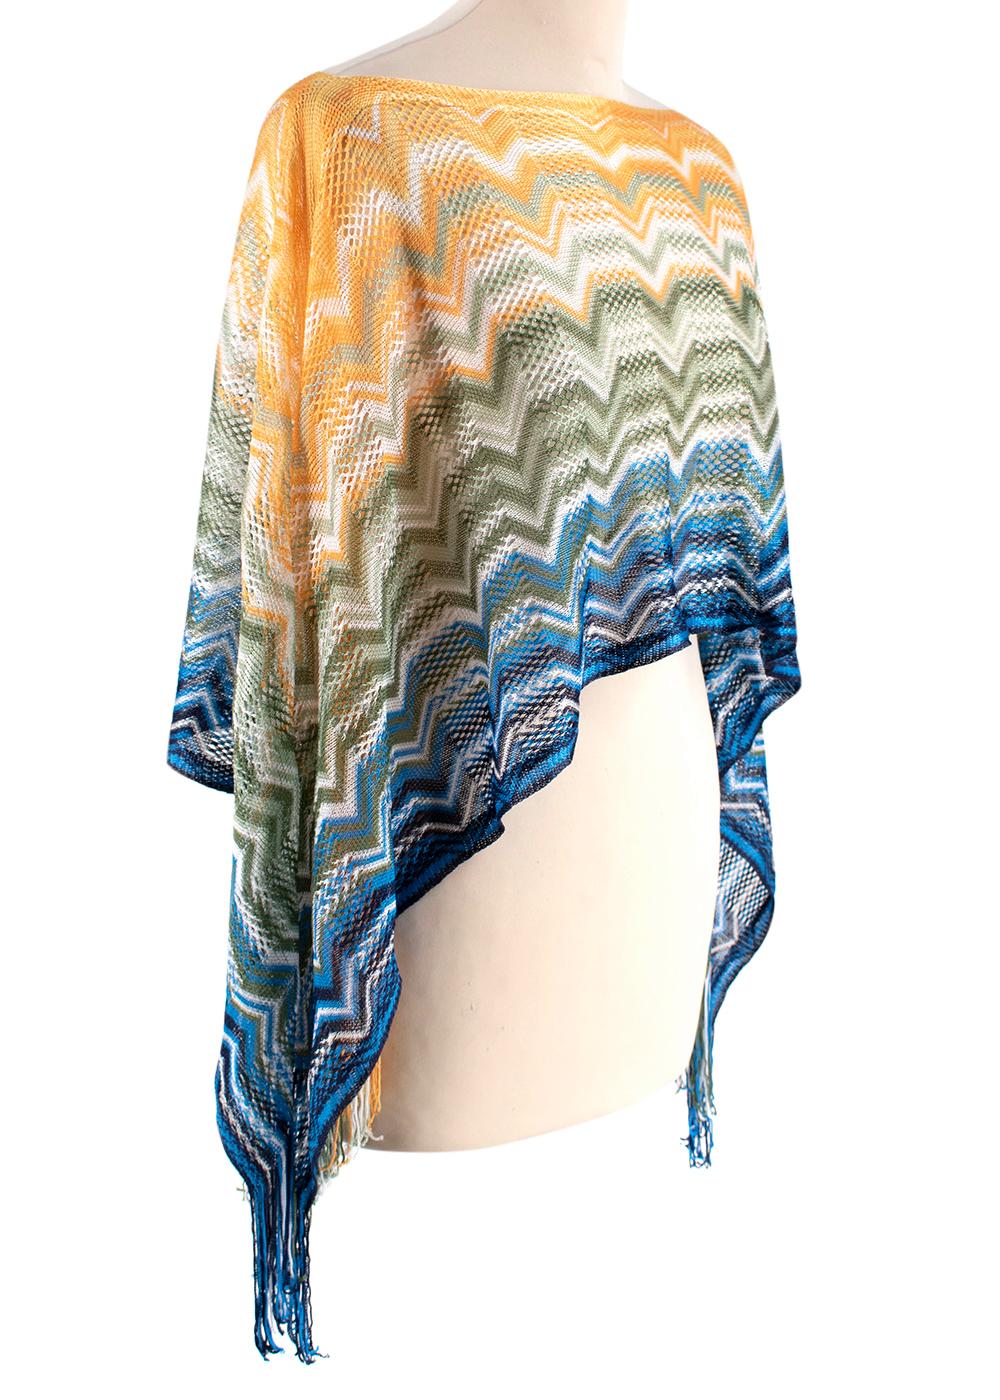 Missoni Multicolour Knit Cropped Poncho

- Lightweight scarf/mini poncho
- Fringes on the sides
- Striped pattern with metallic threading
- An easy layering look for warm-weather outfits

Materials:
100% Viscose

Dry clean only
Made in Italy

Length